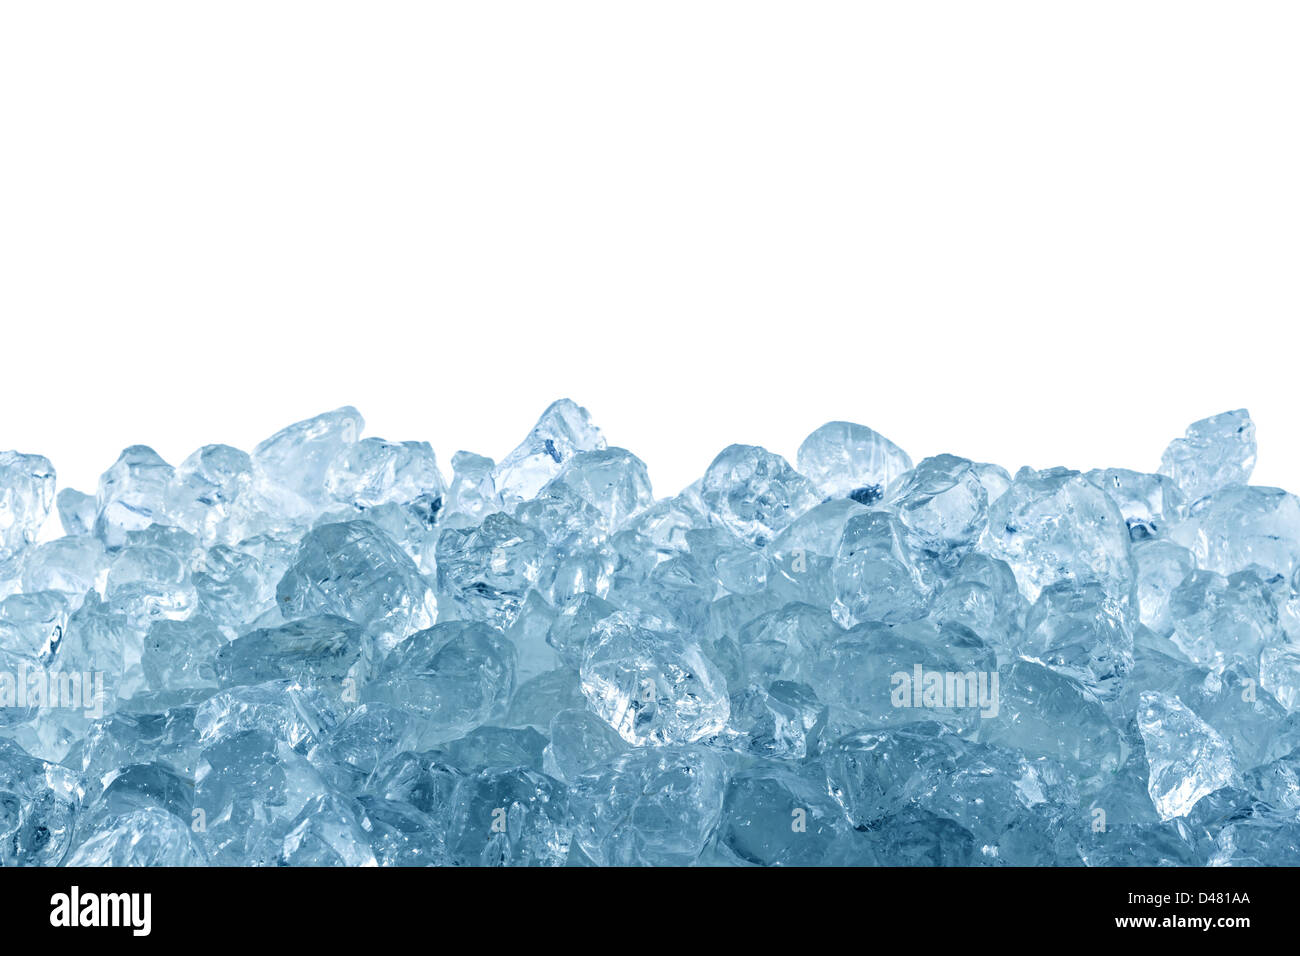 Crushed Ice In A Glass With Spoon Stock Photo, Picture and Royalty